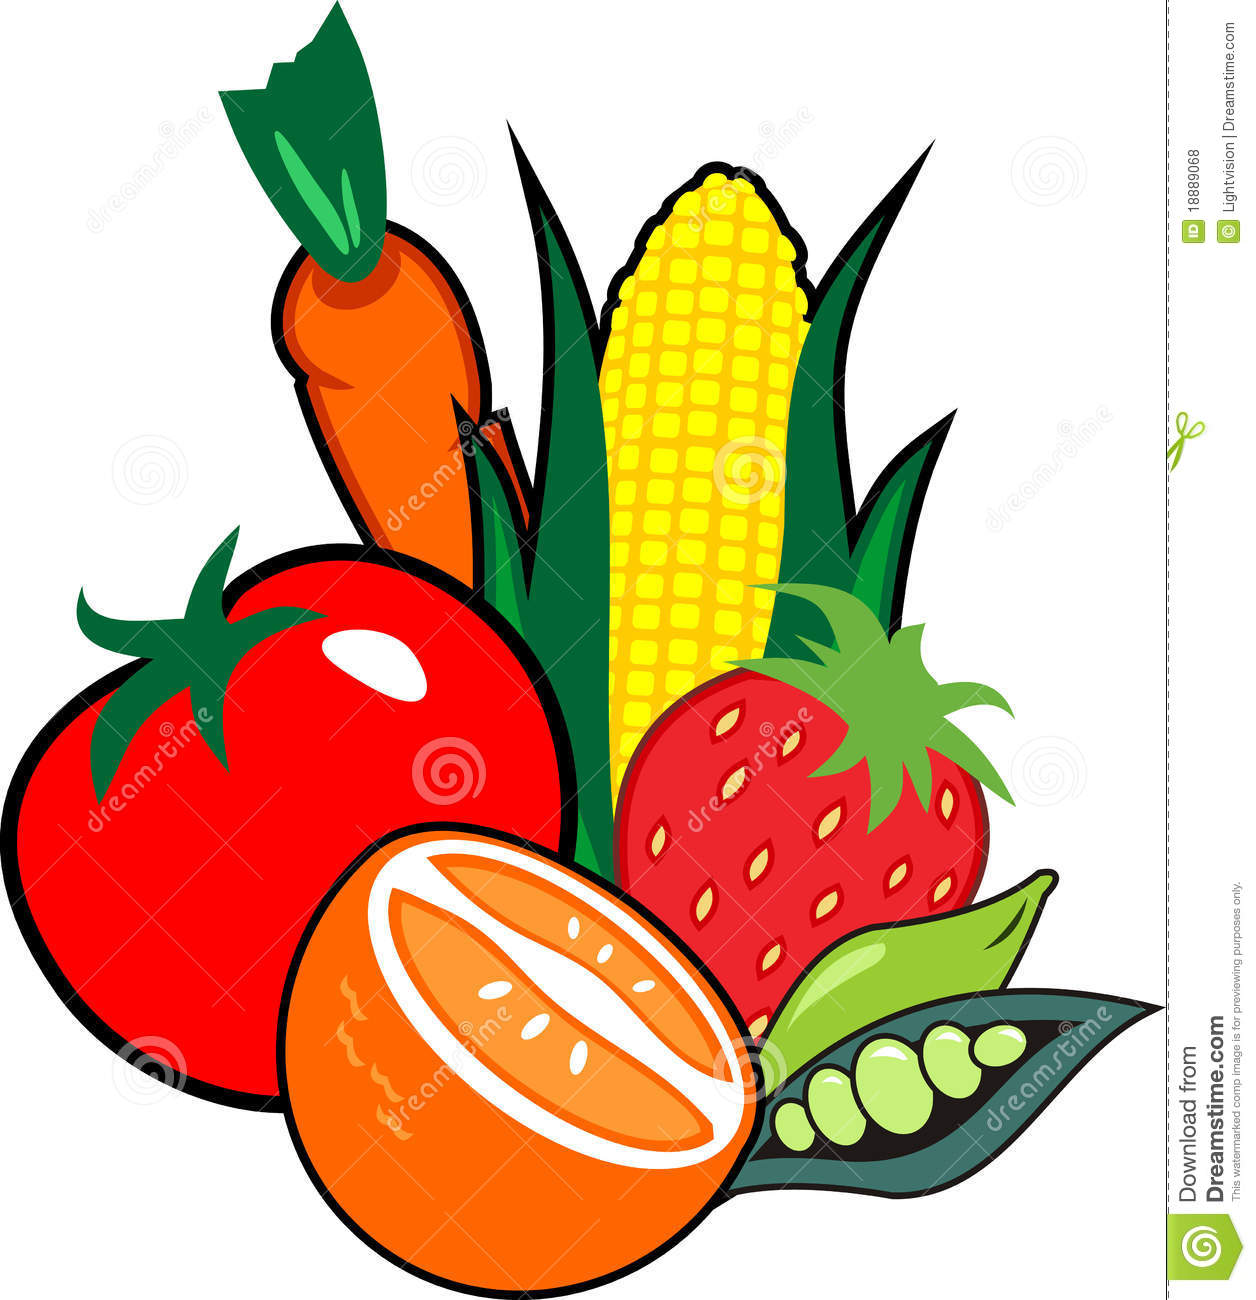 Clipart vegetables and fruits.